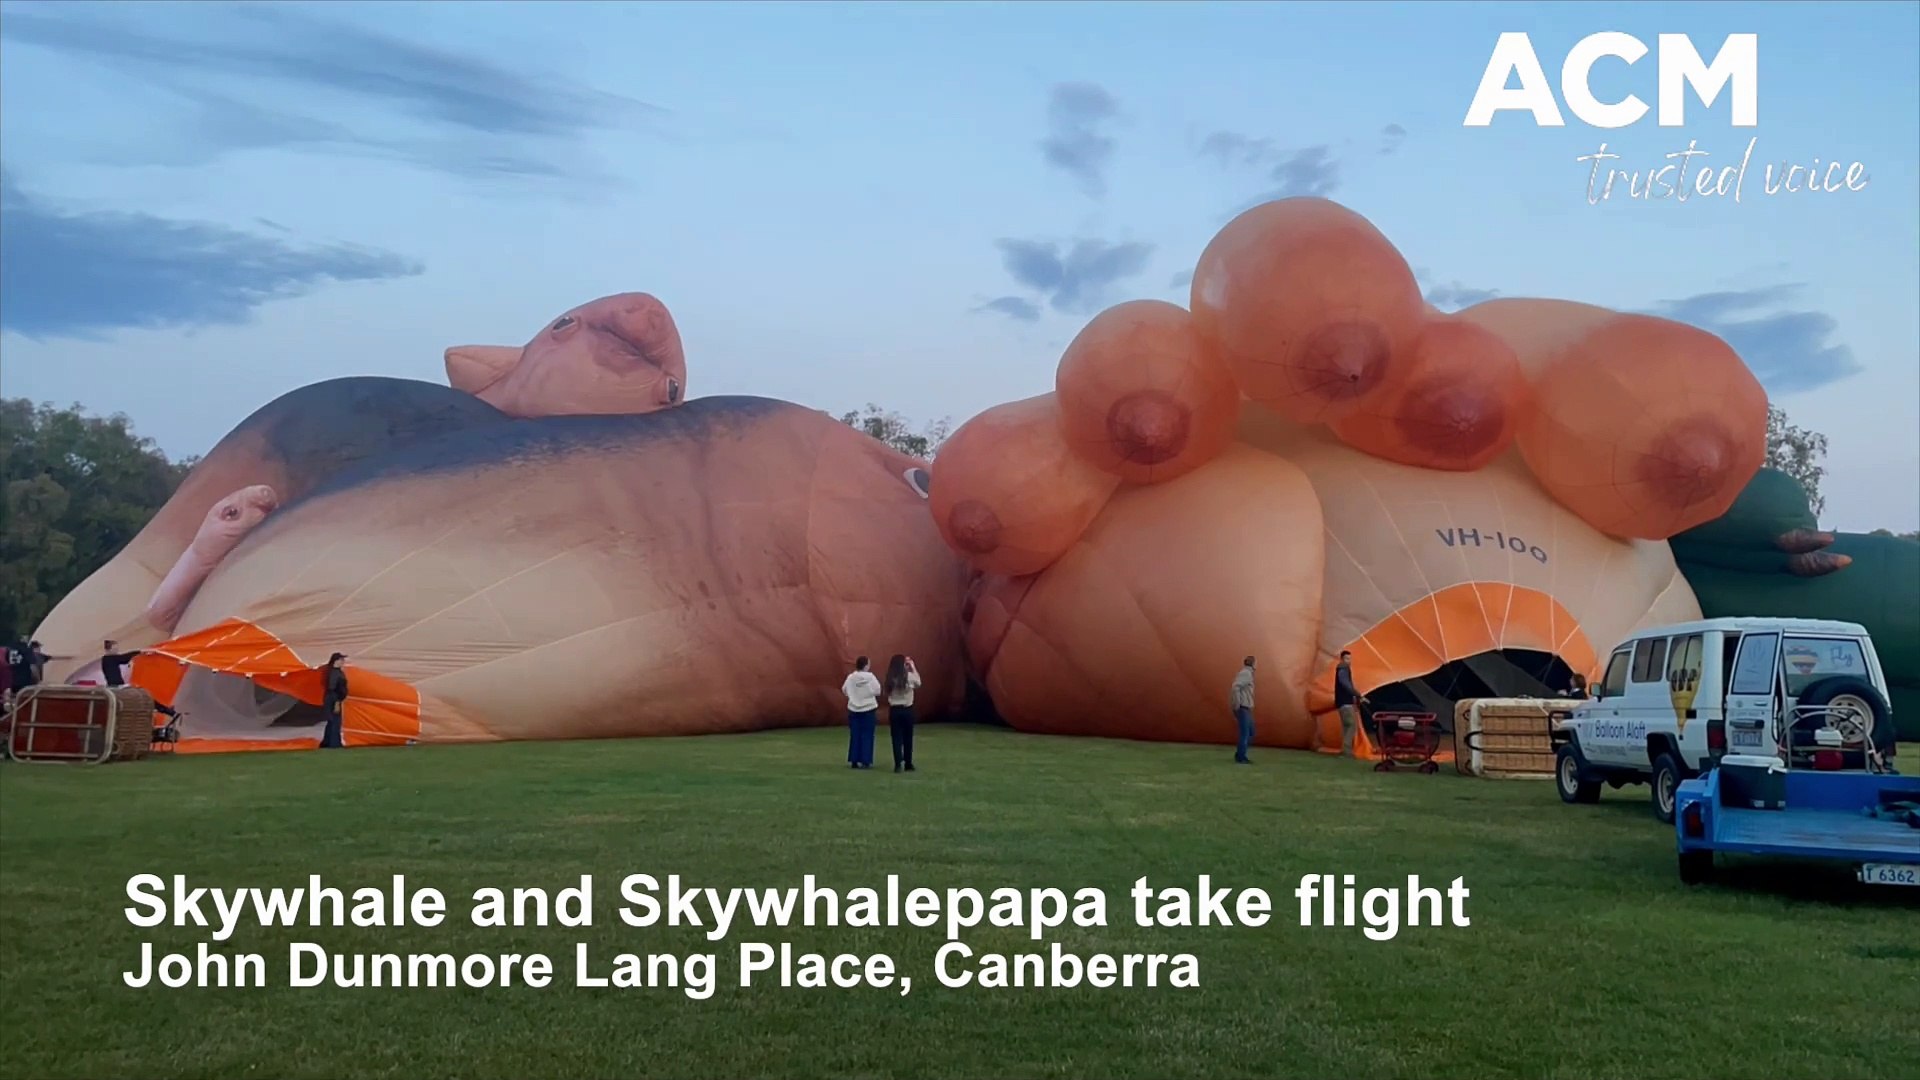 Skywhale and Skywhalepapa spotted in Canberra - video Dailymotion